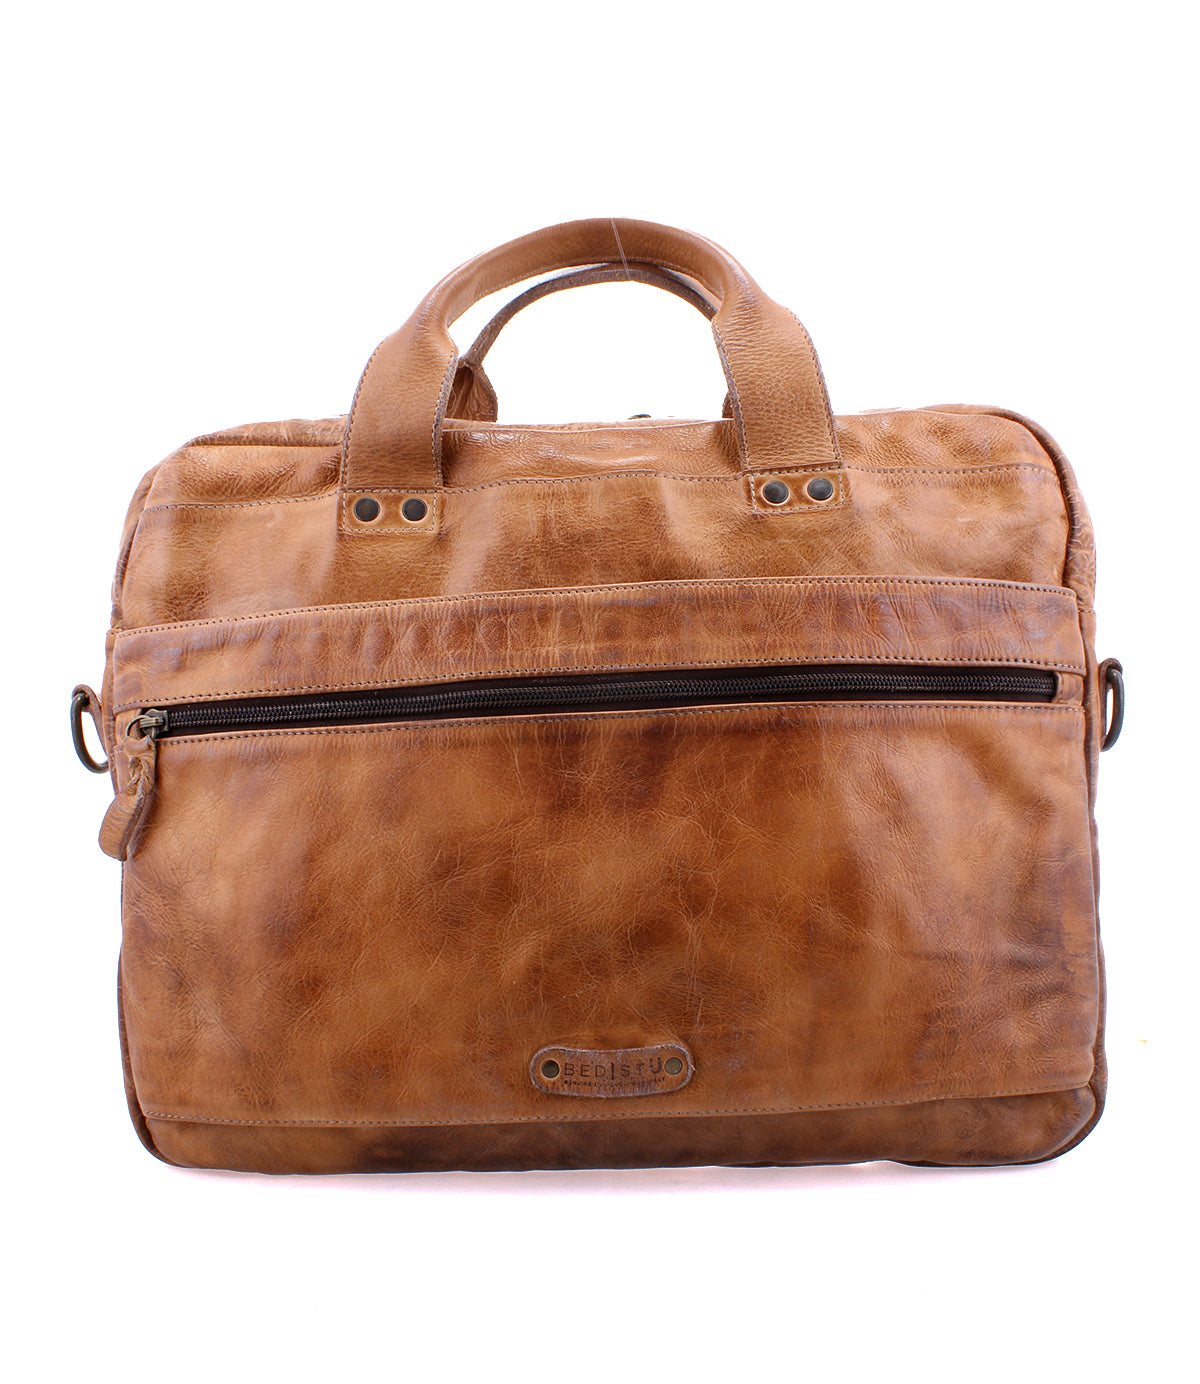 A Conclusion laptop bag made of vegetable-tanned leather with a zipper, perfect for work essentials. (Brand: Bed Stu)